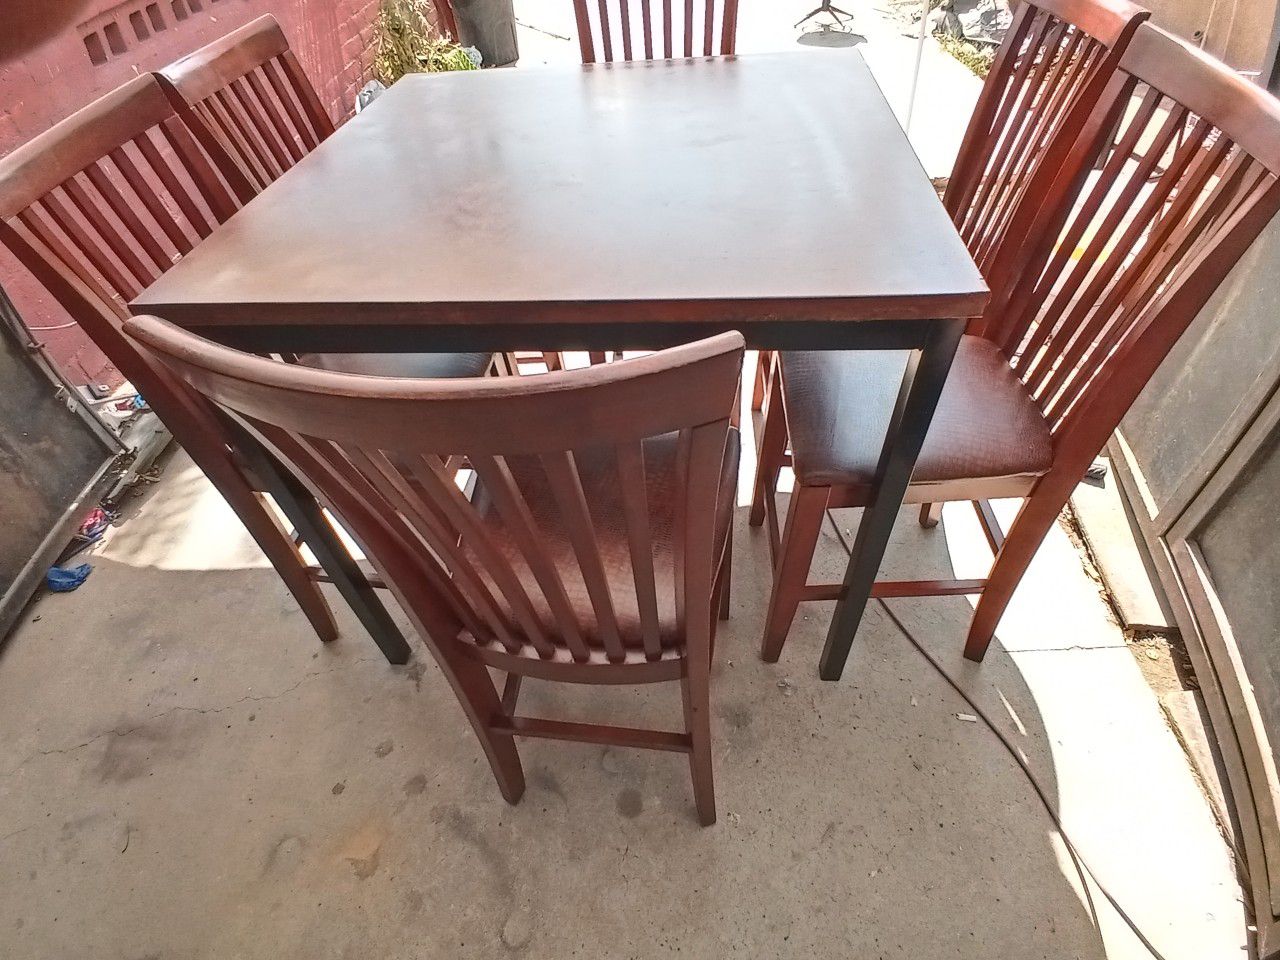 BEAUTIFUL TALL WOOD TABLE WITH METAL LEGS AND 6 HEAVY TALL WOOD CHAIRS NEW SEATING, IN EXCELLENT CONDITION $170 NEGOTIABLE